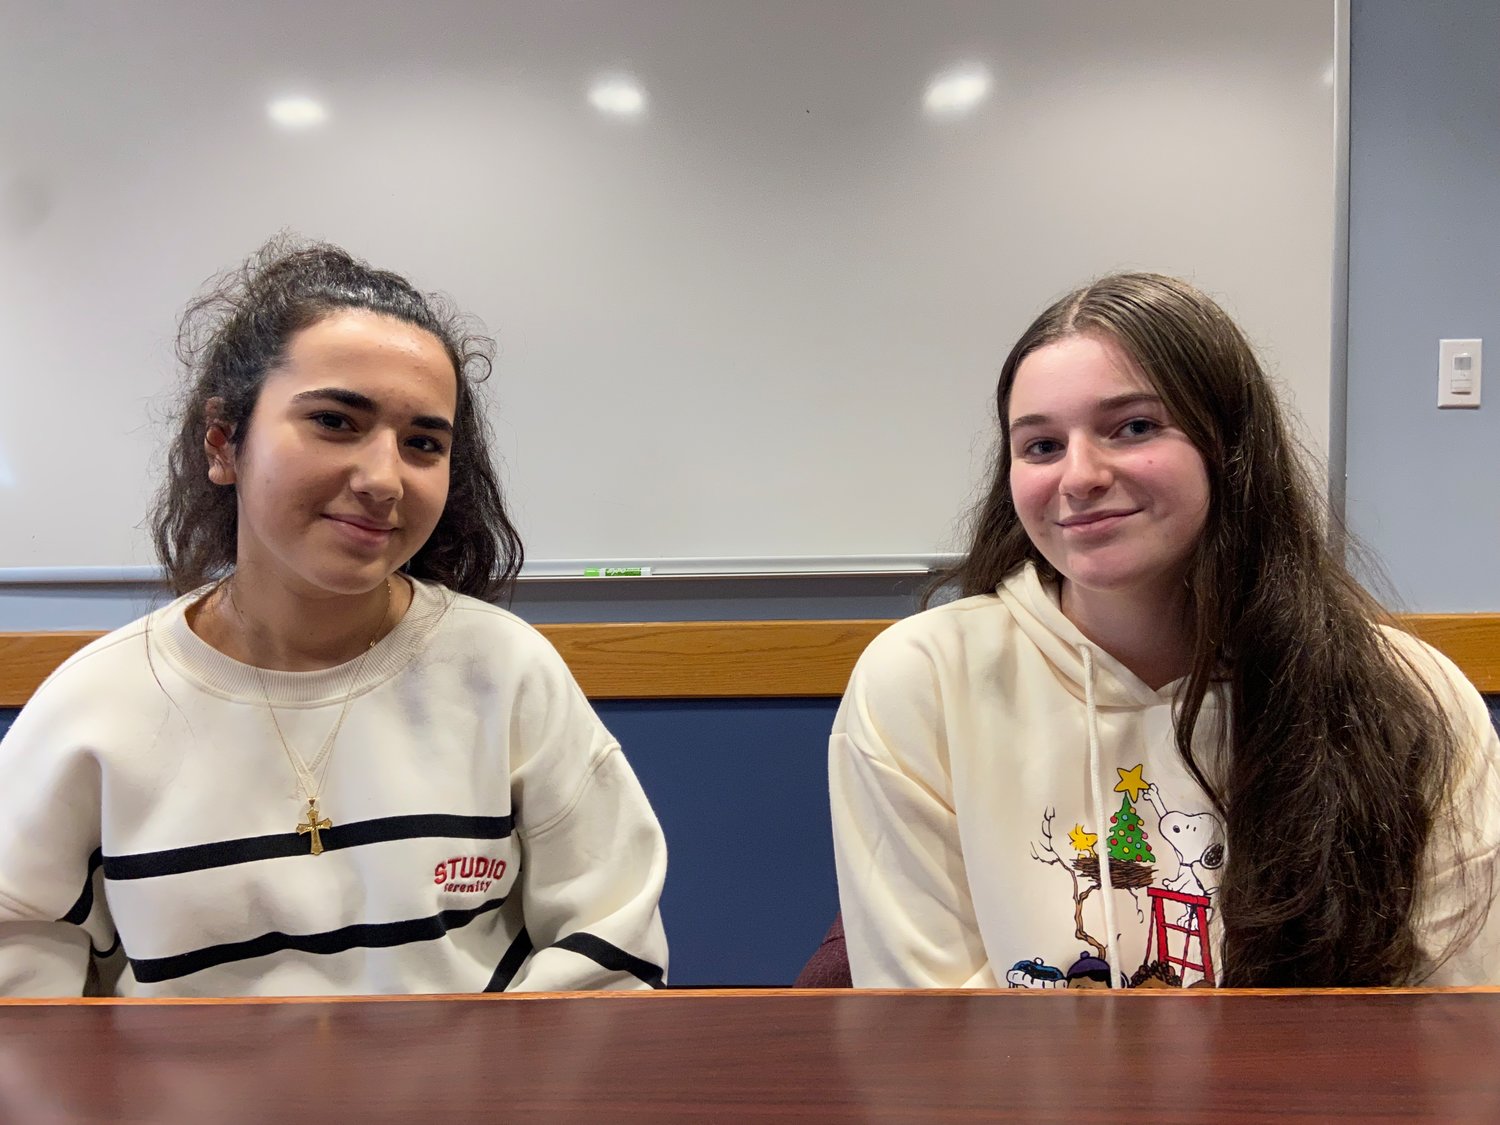 Sophomores Alissa Mili, left, and Annabella Lanzer were chosen by school officials to represent East Meadow High School at the Hugh O’Brian Youth Leadership seminar.